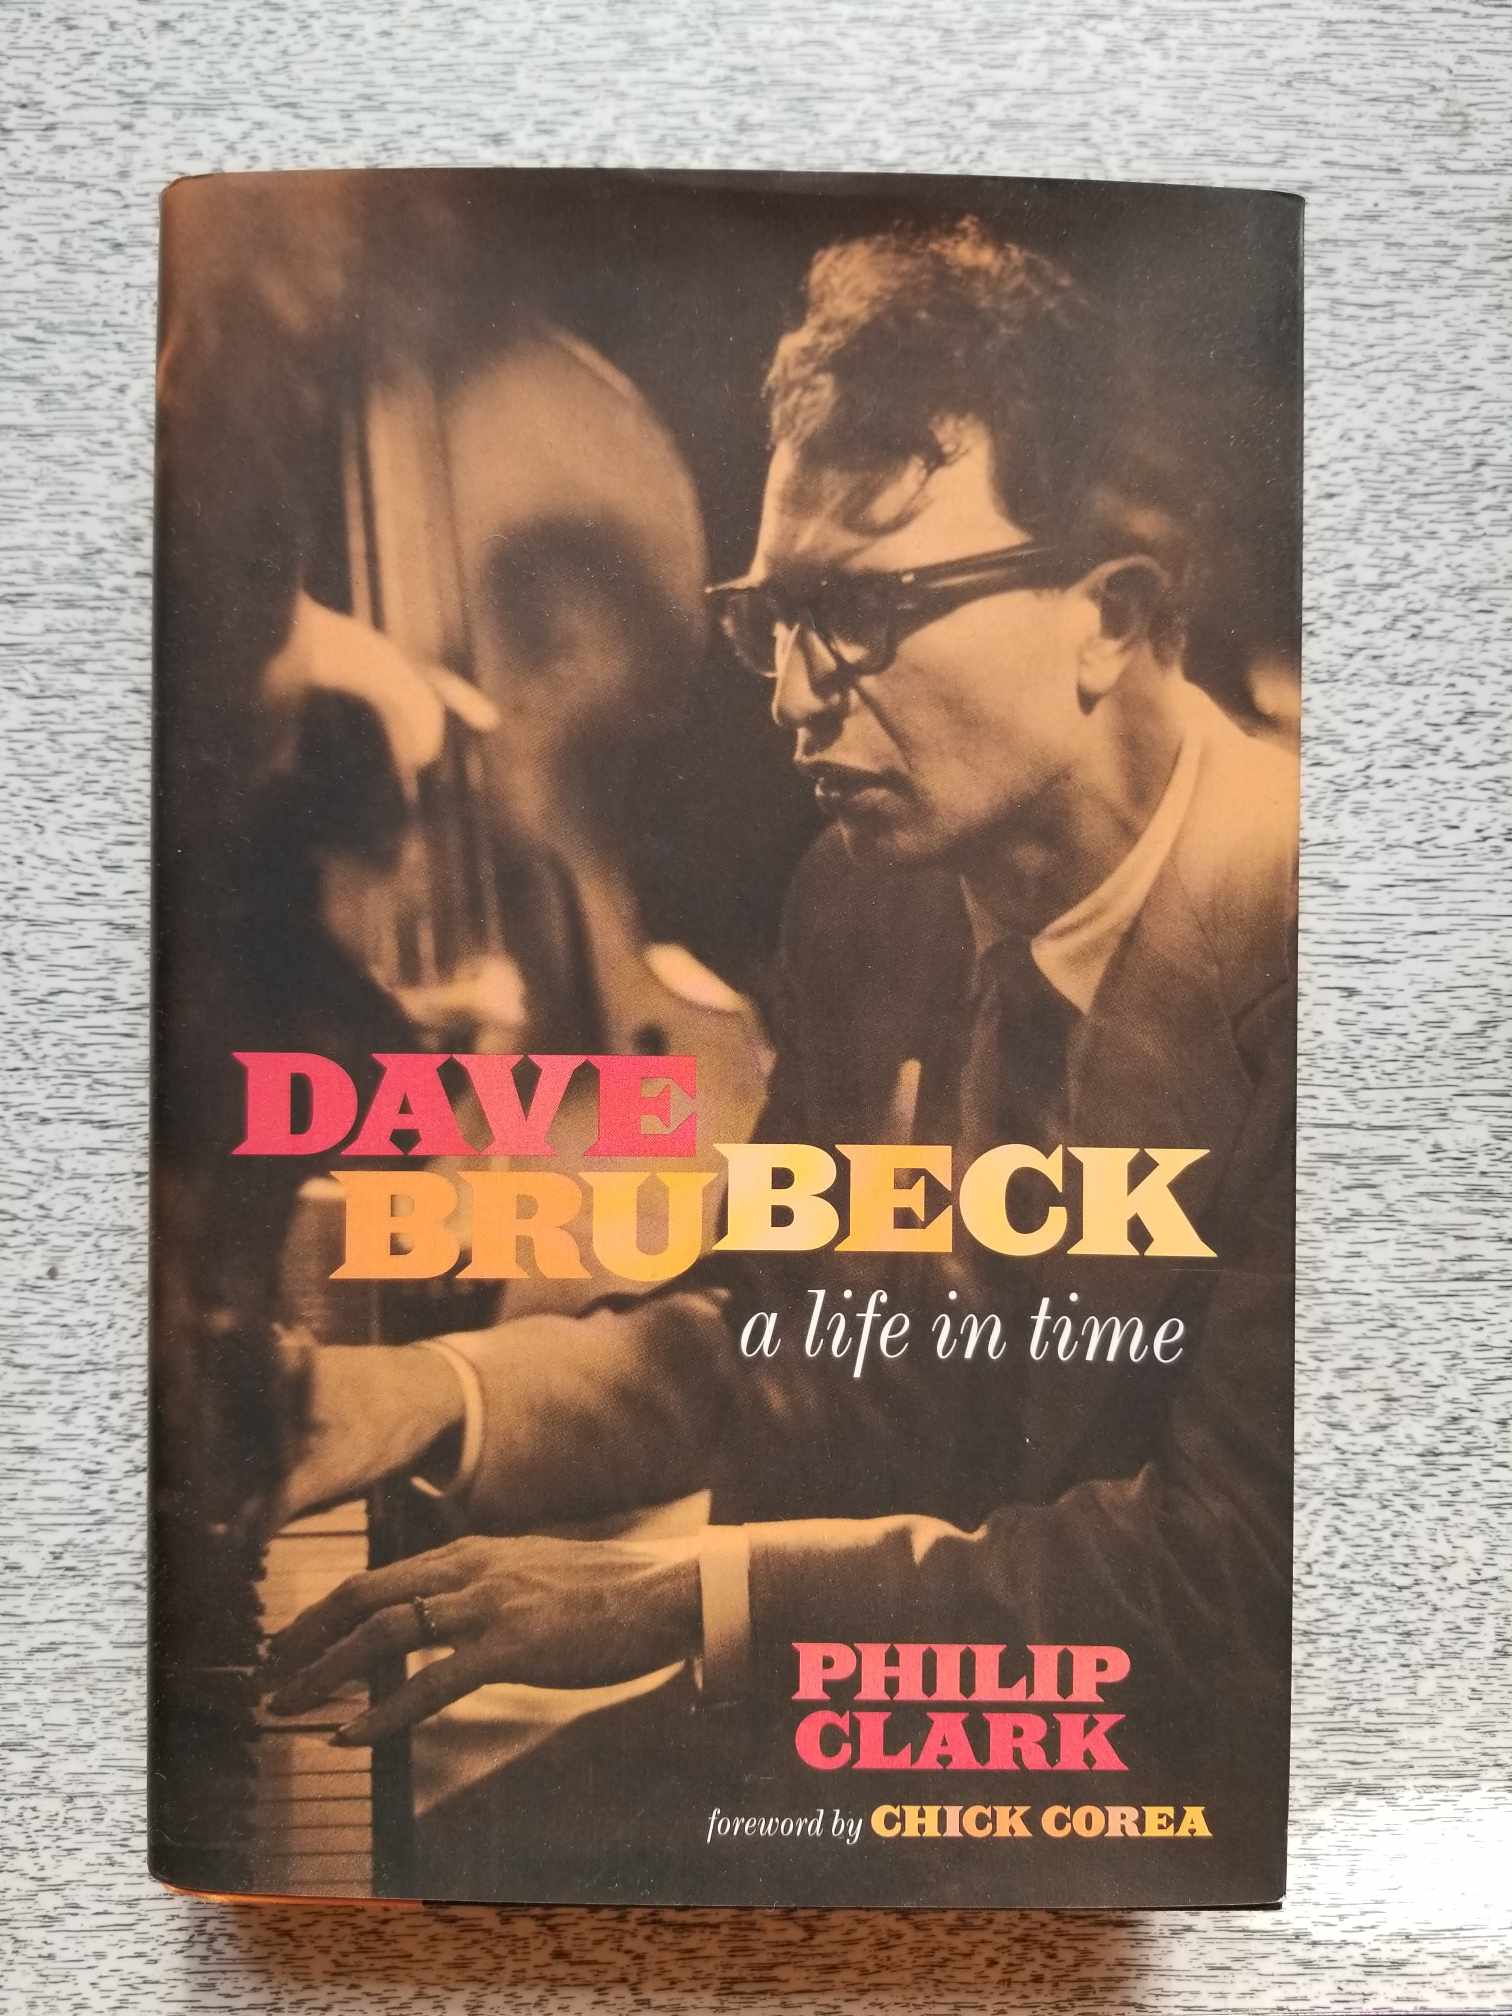 Dave Brubeck: A Life in Time by Philip Clark